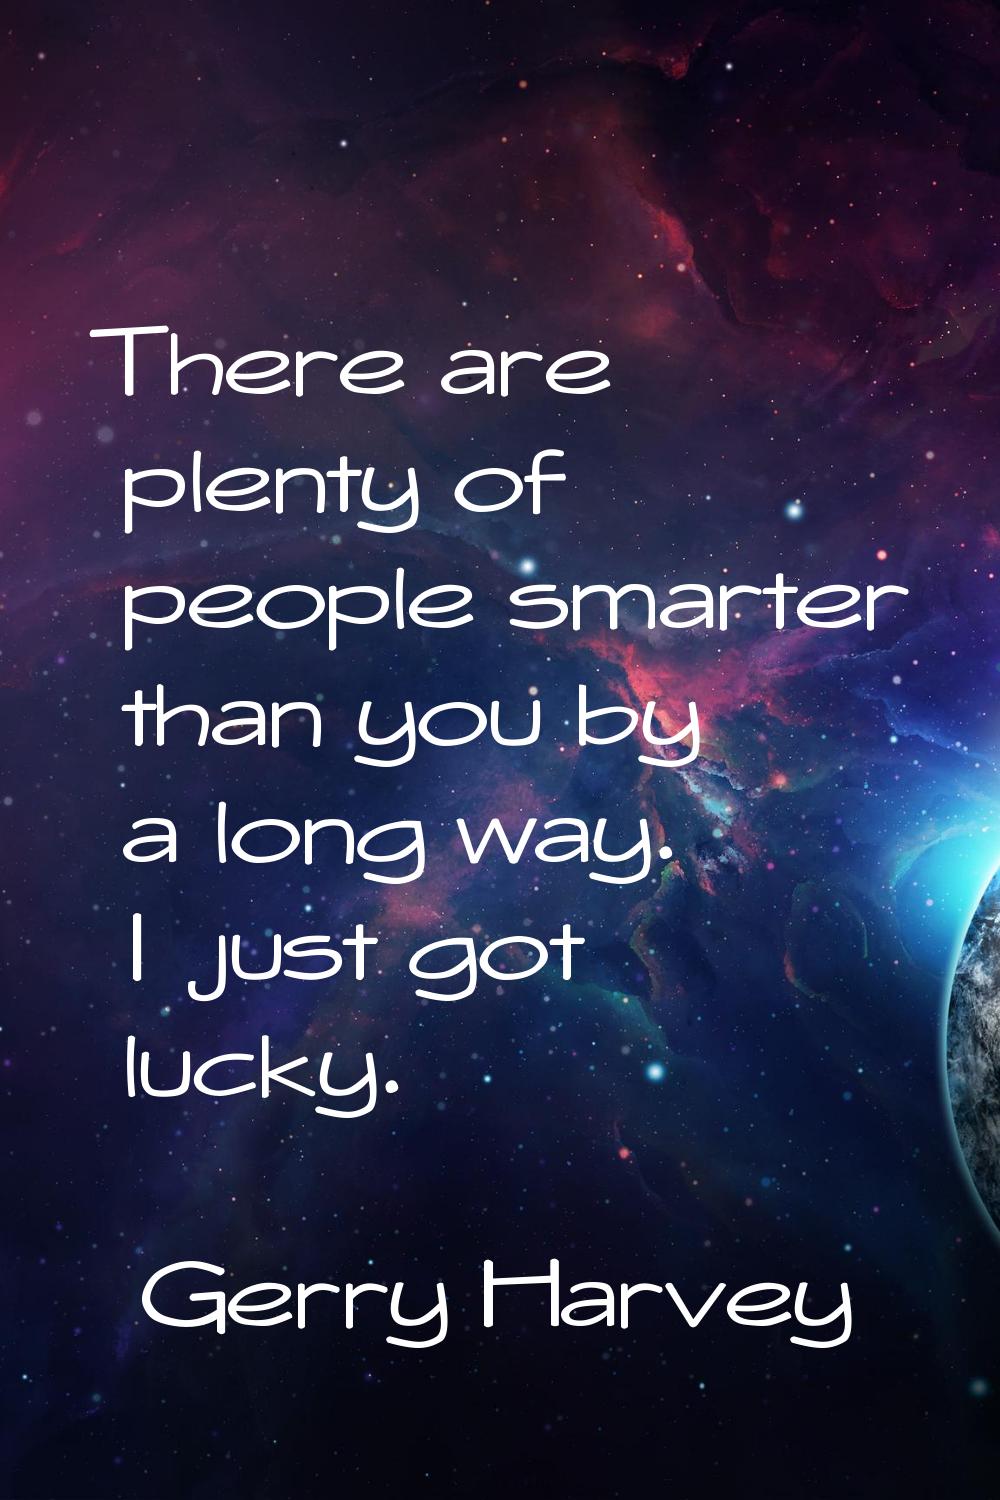 There are plenty of people smarter than you by a long way. I just got lucky.